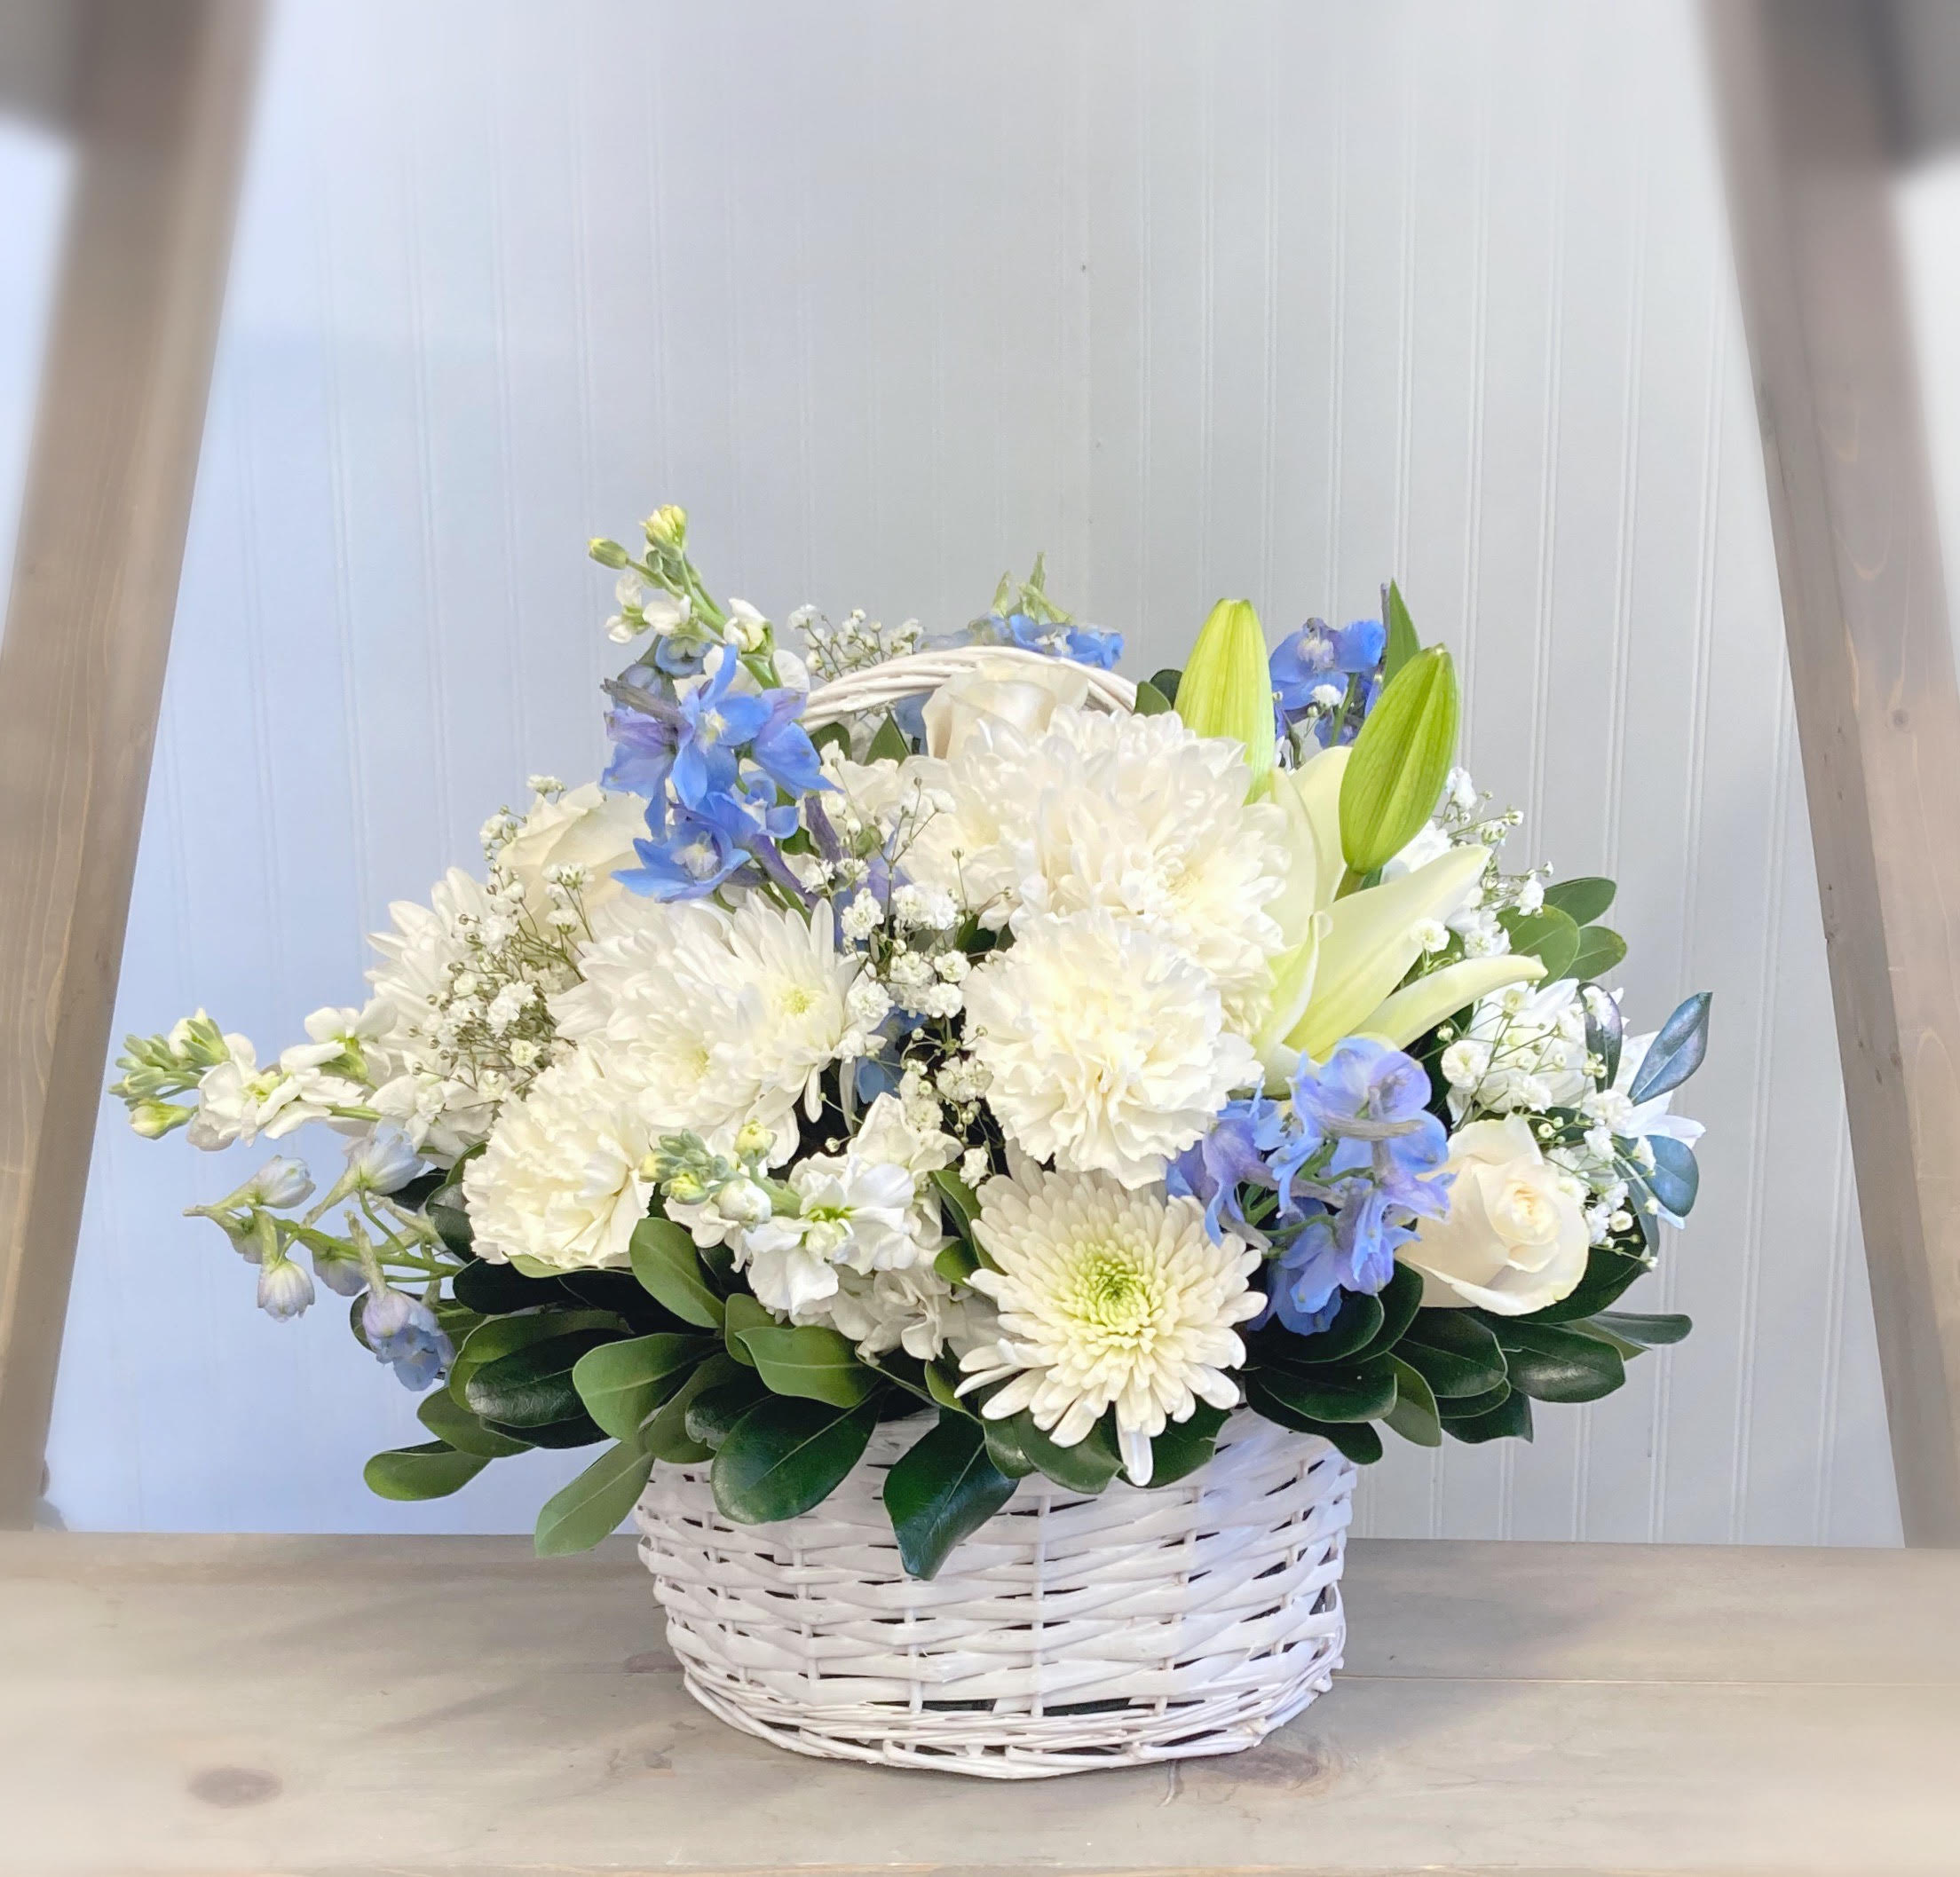 Tender Sympathy - Blue and White - Our peaceful blue and white design is hand crafted in a wicker basket